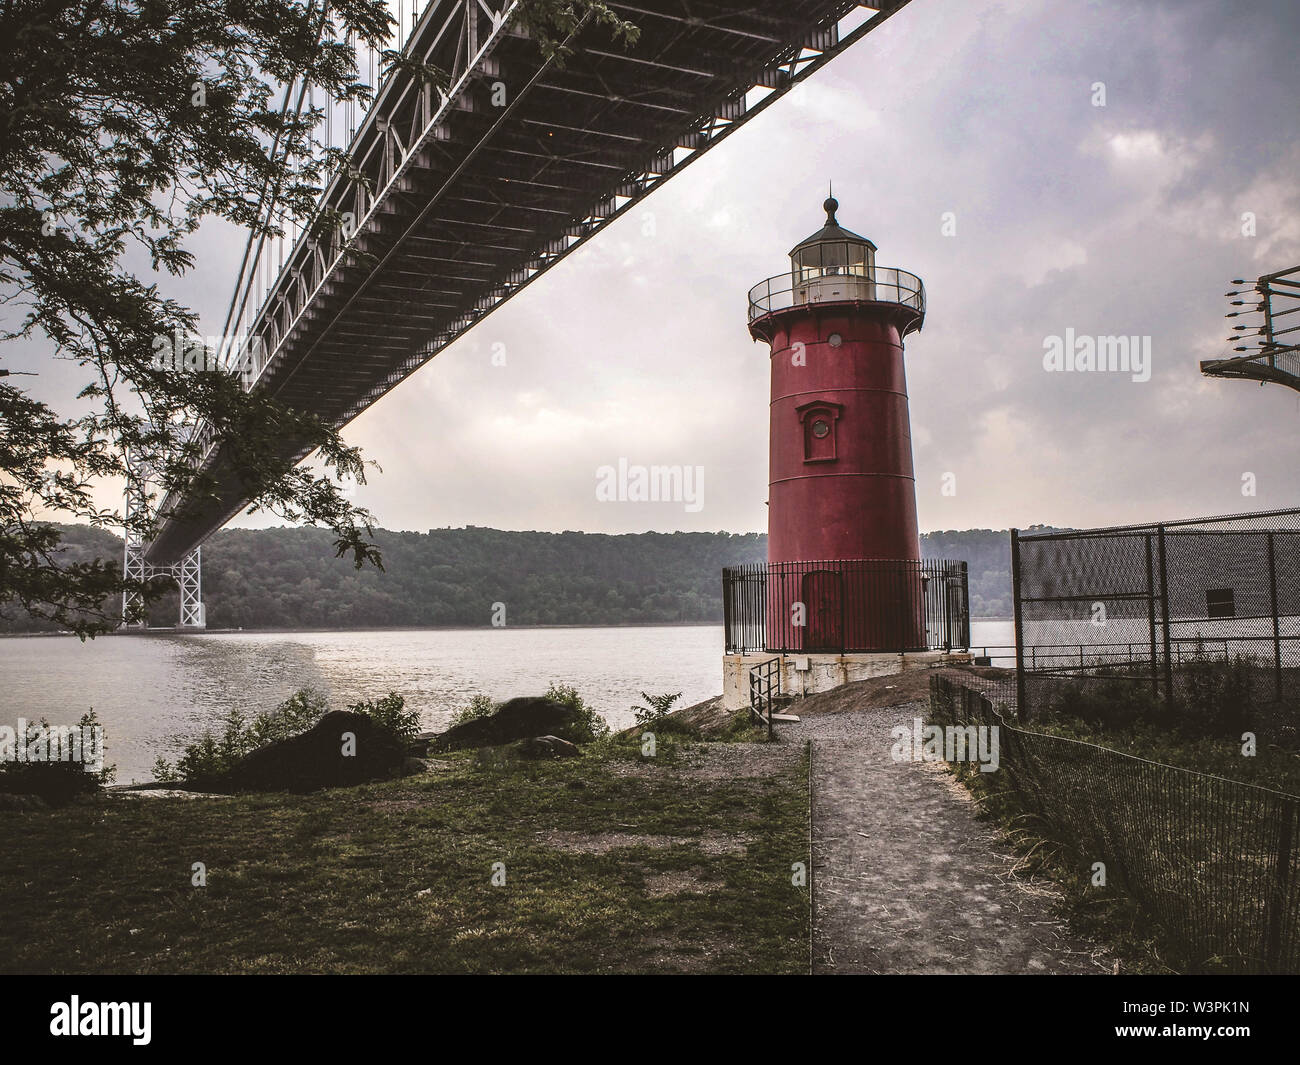 The Little Red Lighthouse and George Washinton bridge Stock Photo